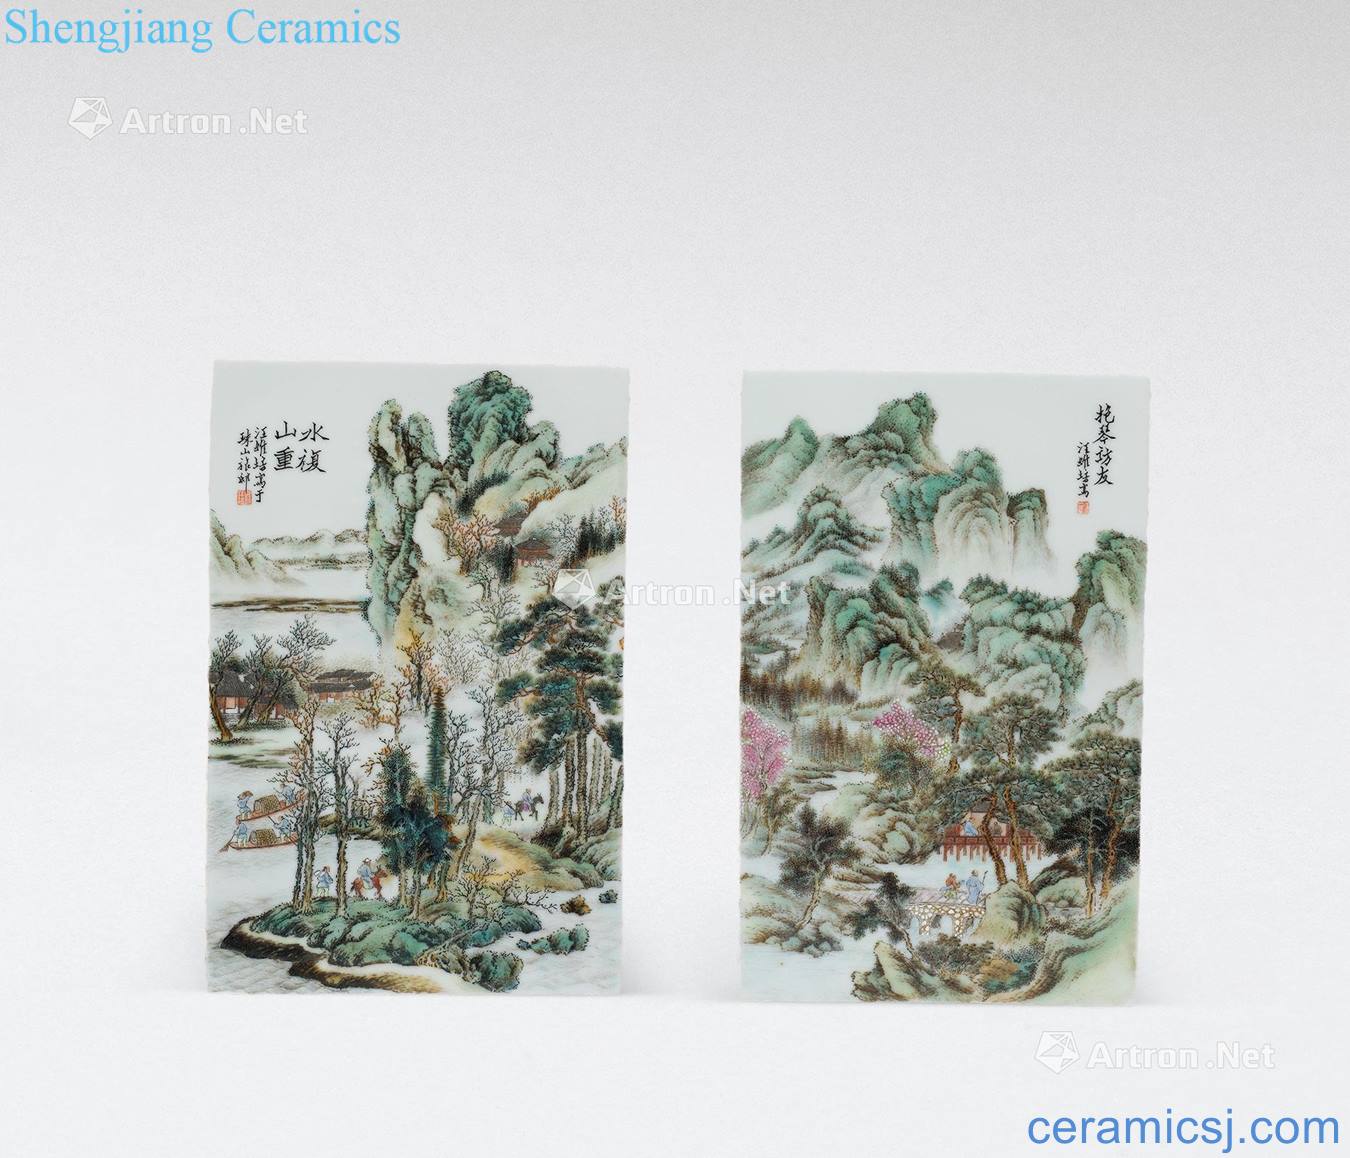 Qing Wang Weipei pastel landscape albums (a)